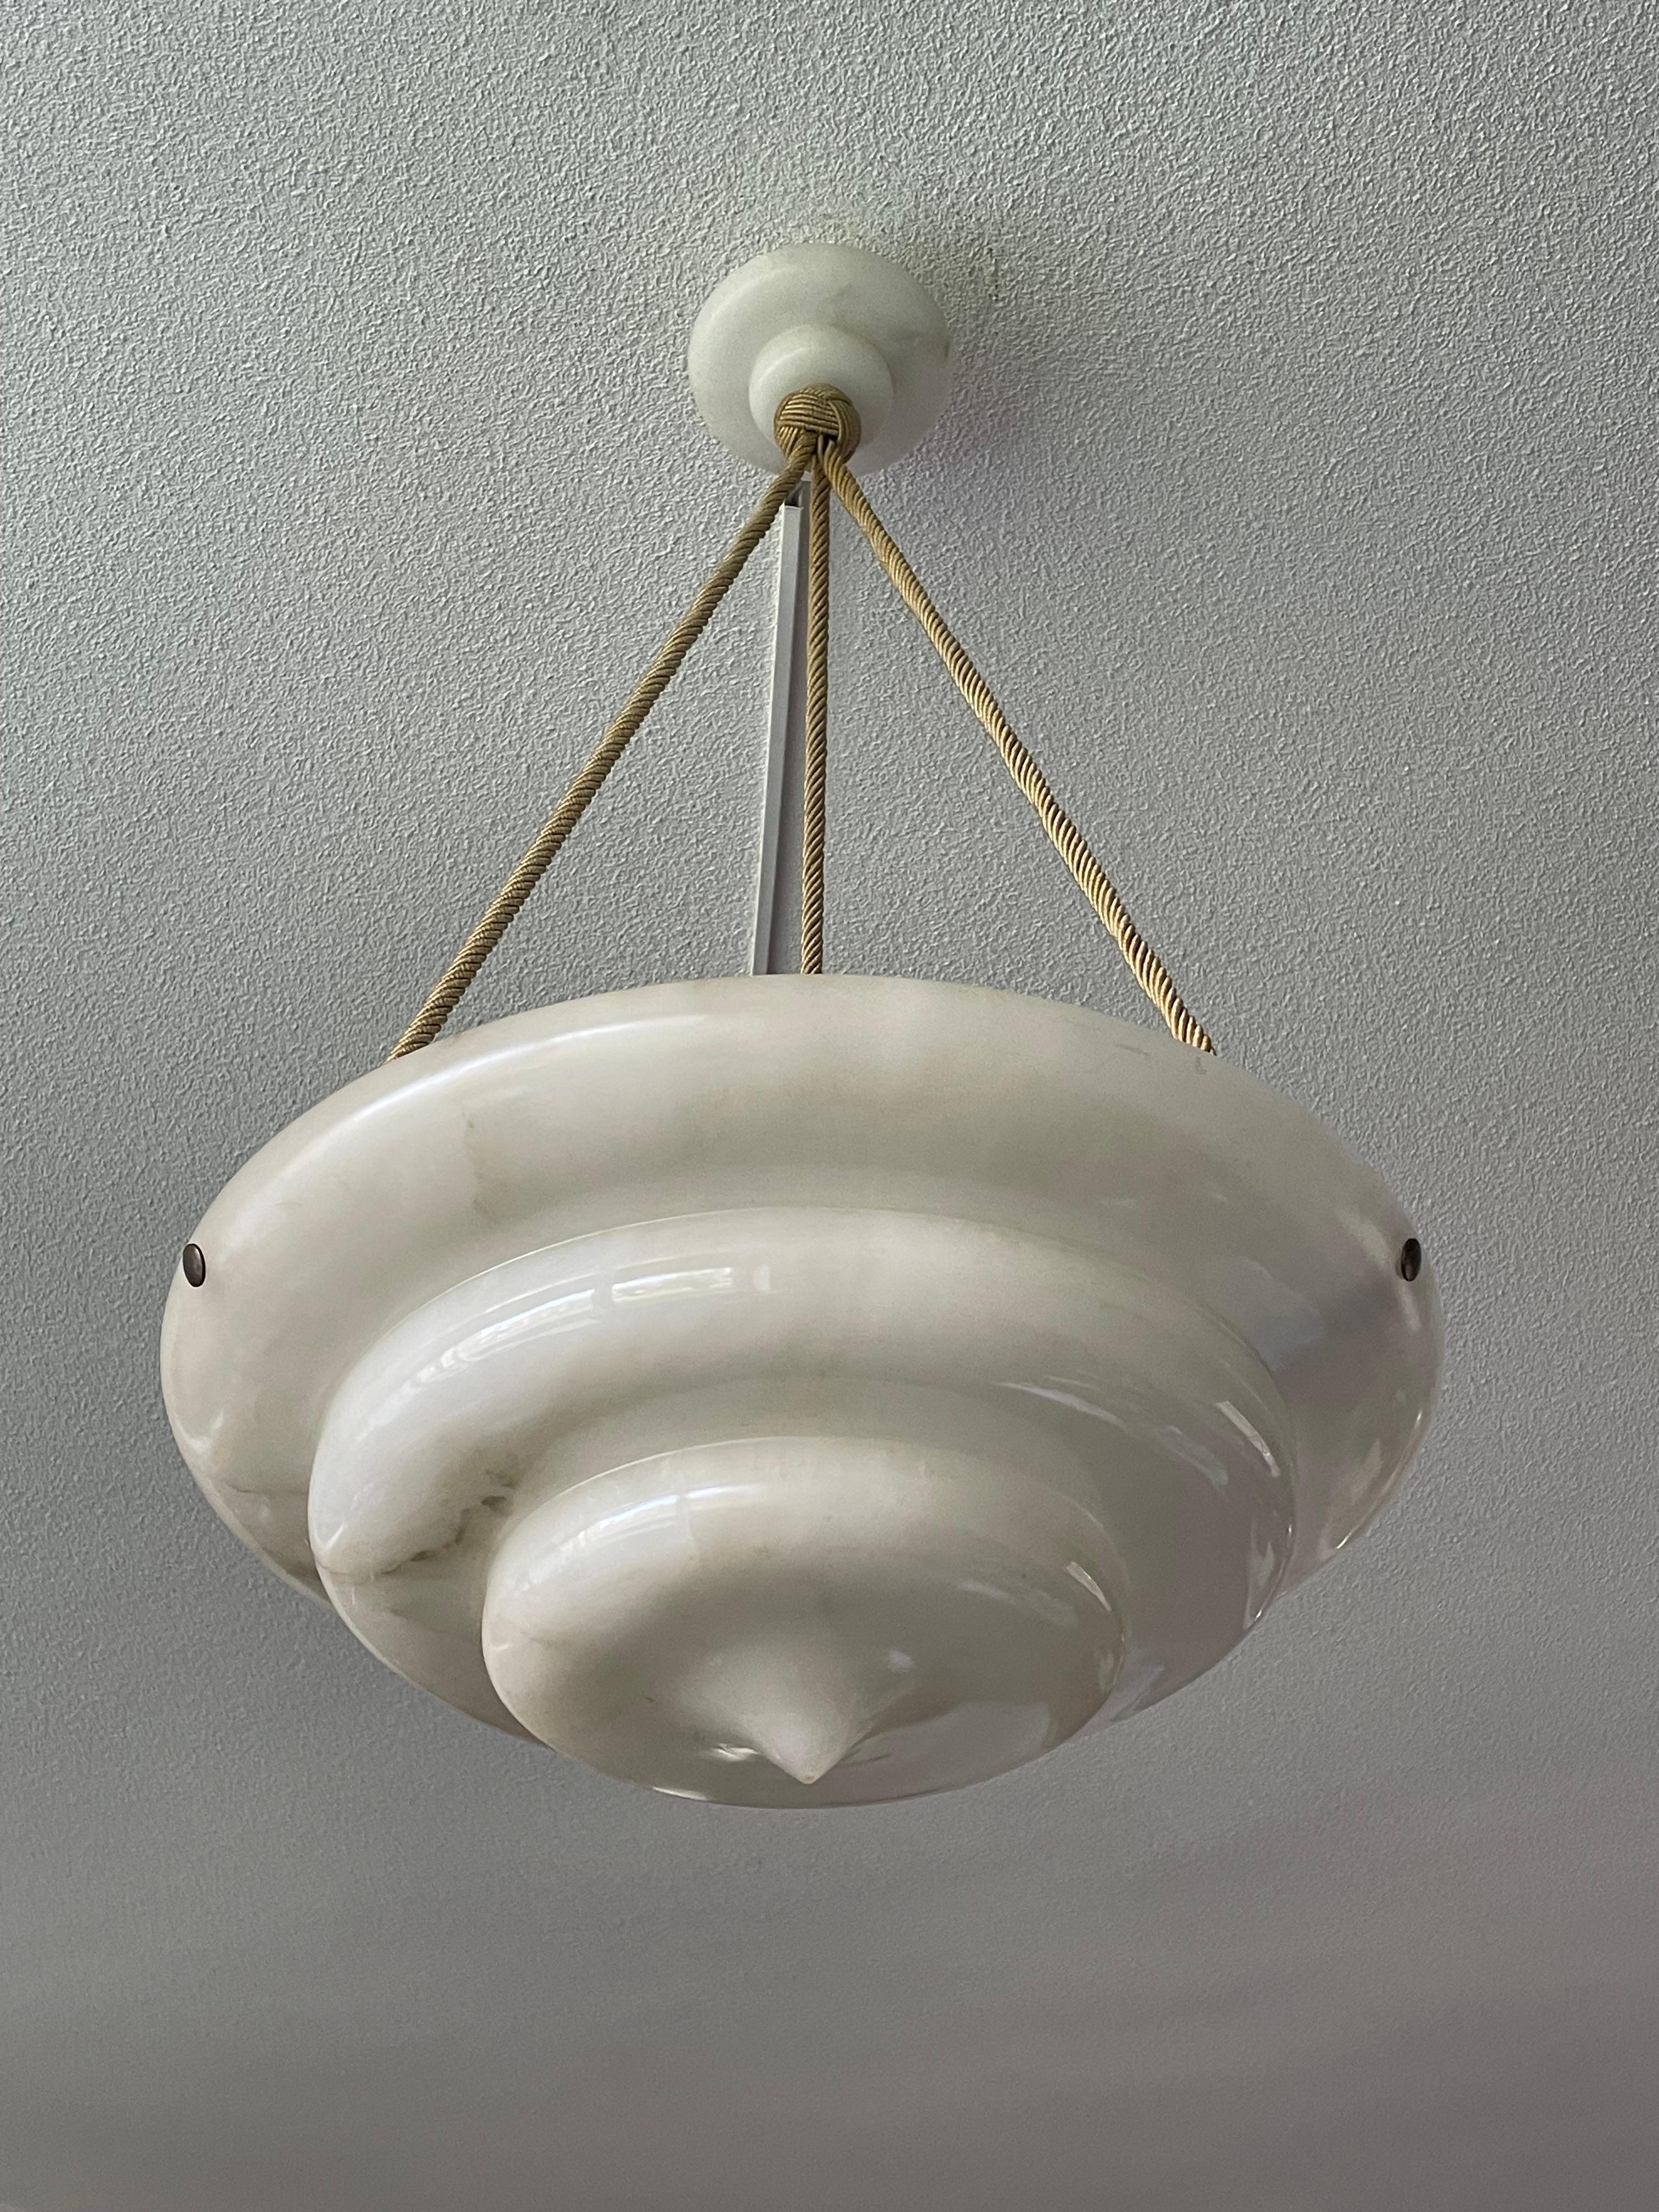 Exceptional Art Deco Hand Carved & Layered Alabaster Pendant Light w. Rope Chain For Sale 5